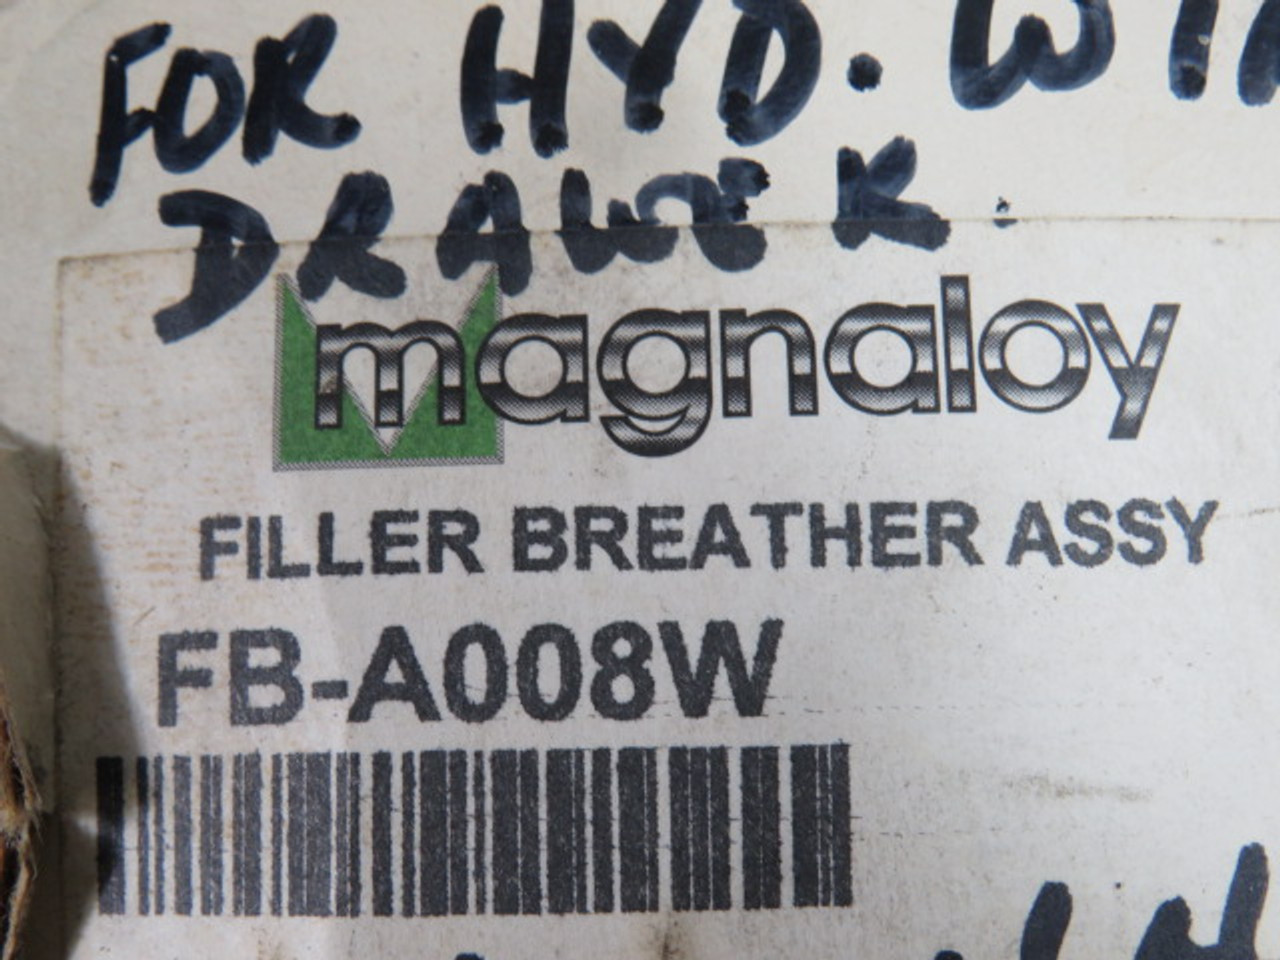 Magnaloy FB-A008W Filler Breather Assembly USED